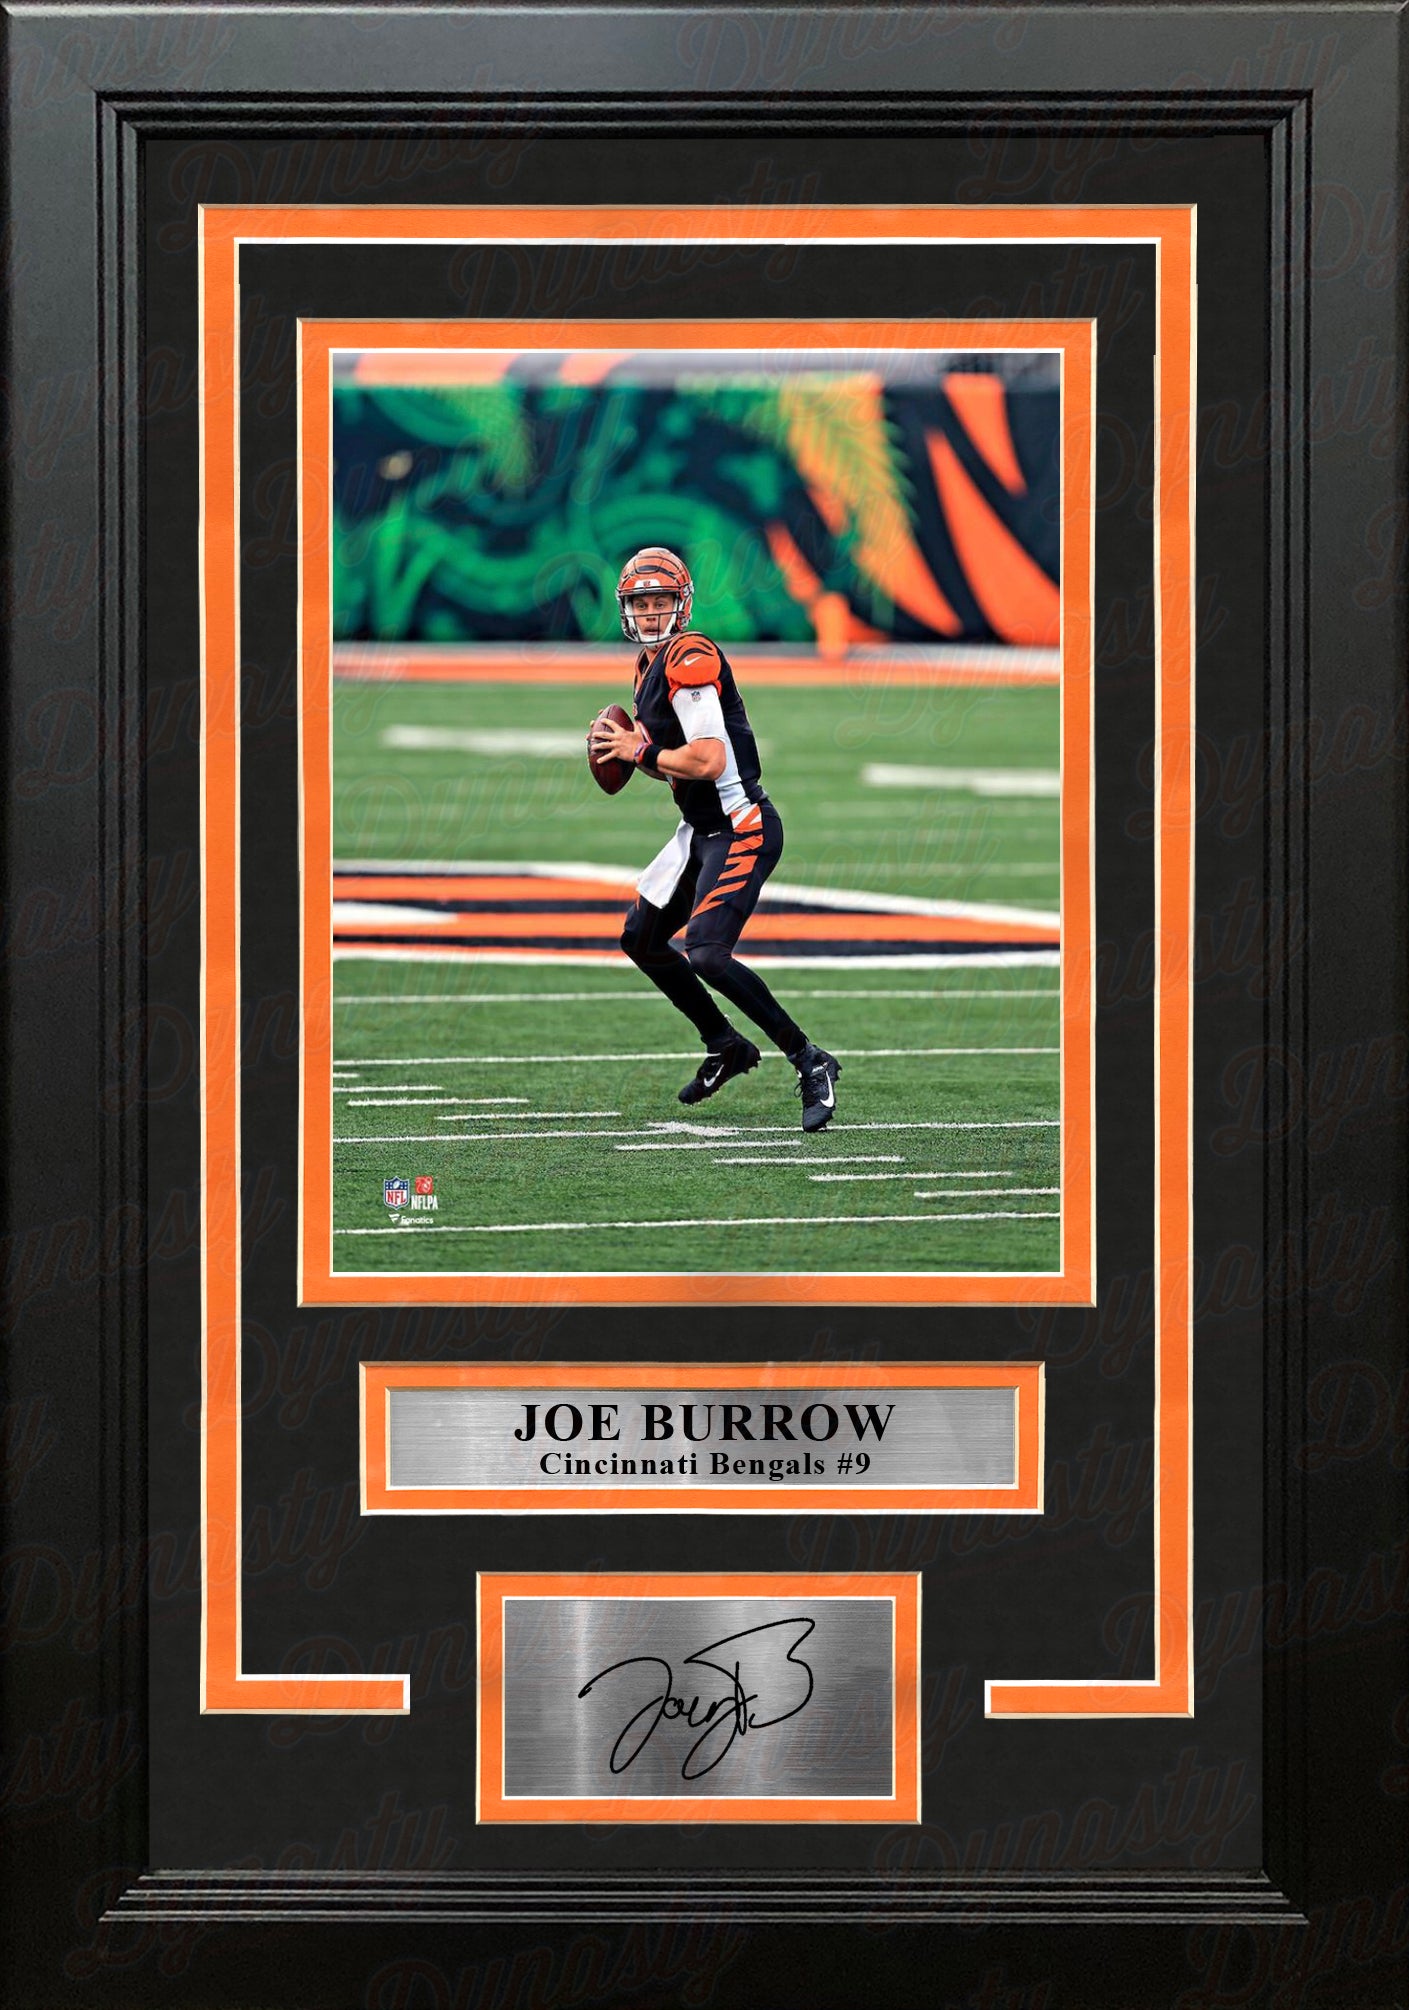 Joe Burrow in Action Cincinnati Bengals 8' x 10' Framed Football Photo with  Engraved Autograph